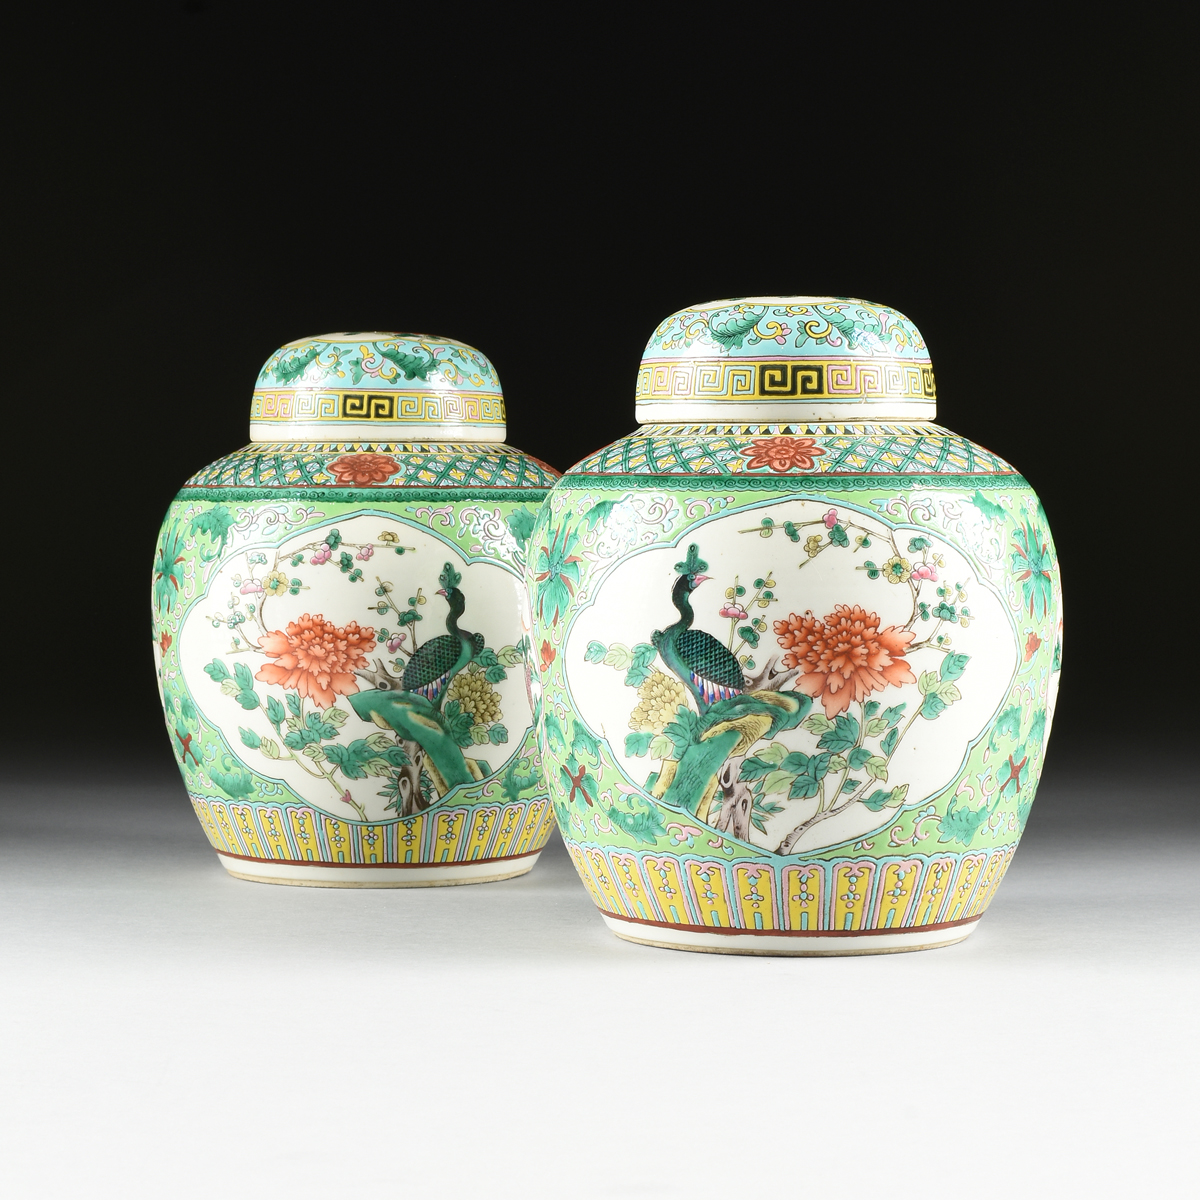 A PAIR OF CHINESE "FAMILLE VERTE" PORCELAIN GINGER JARS WITH LIDS, REPUBLIC PERIOD CIRCA 1917-